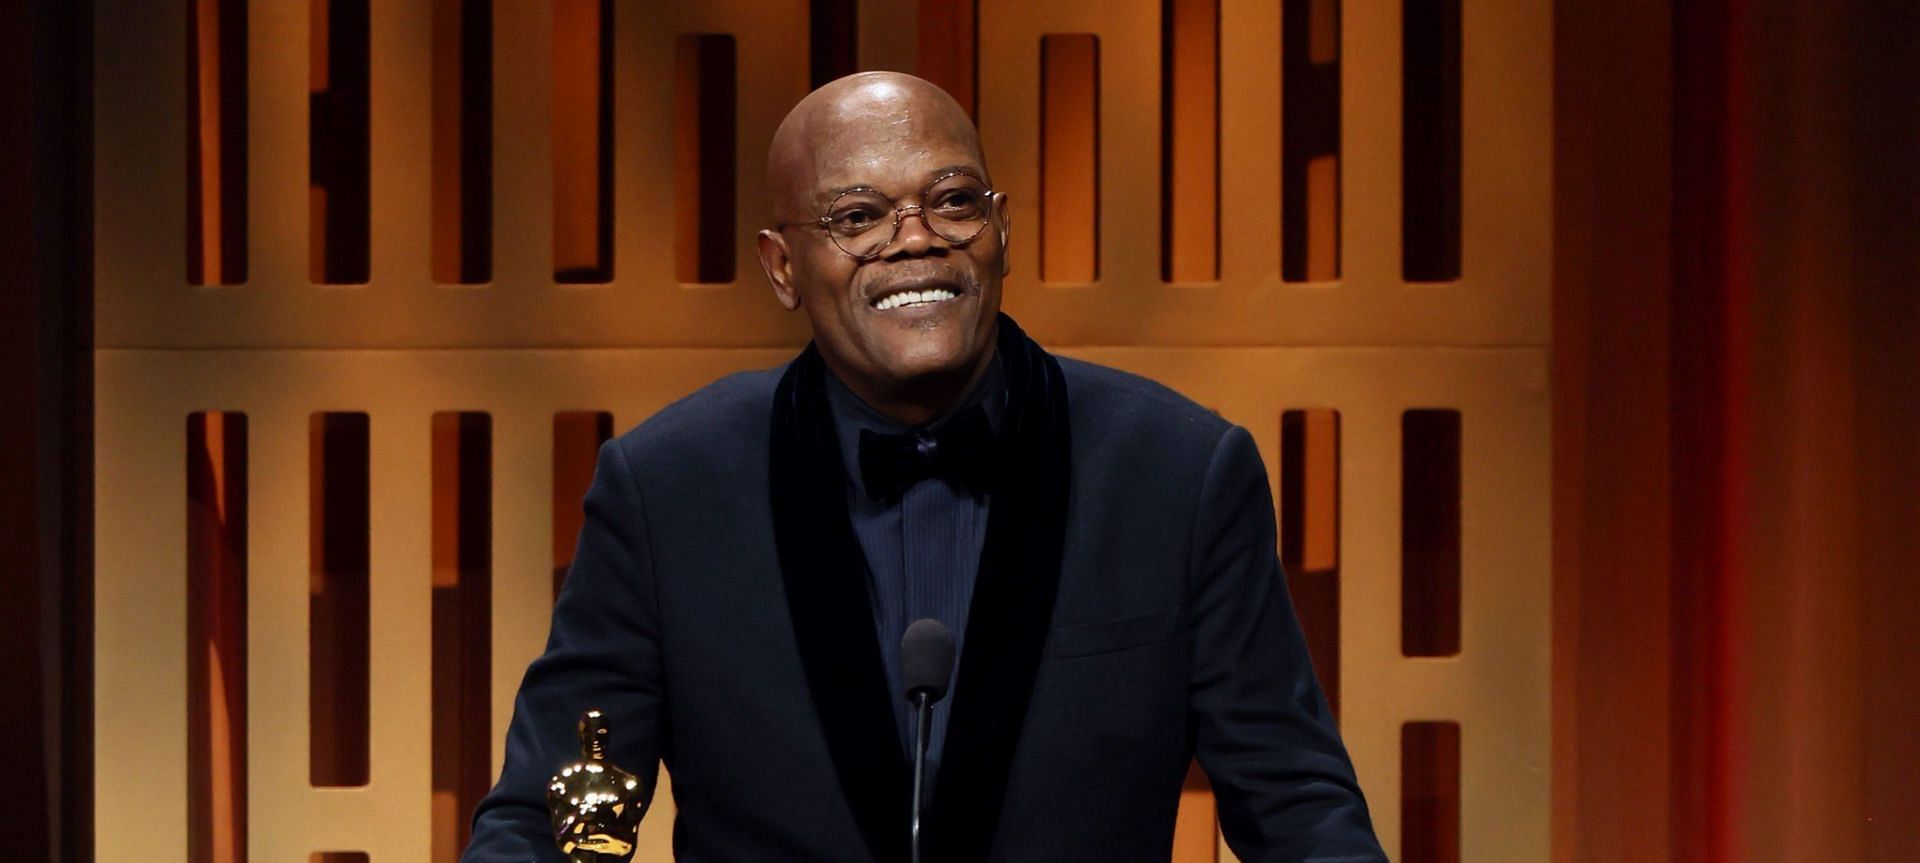 Samuel L Jackson is one of the most prominent actors of all time (Image via Getty Images)